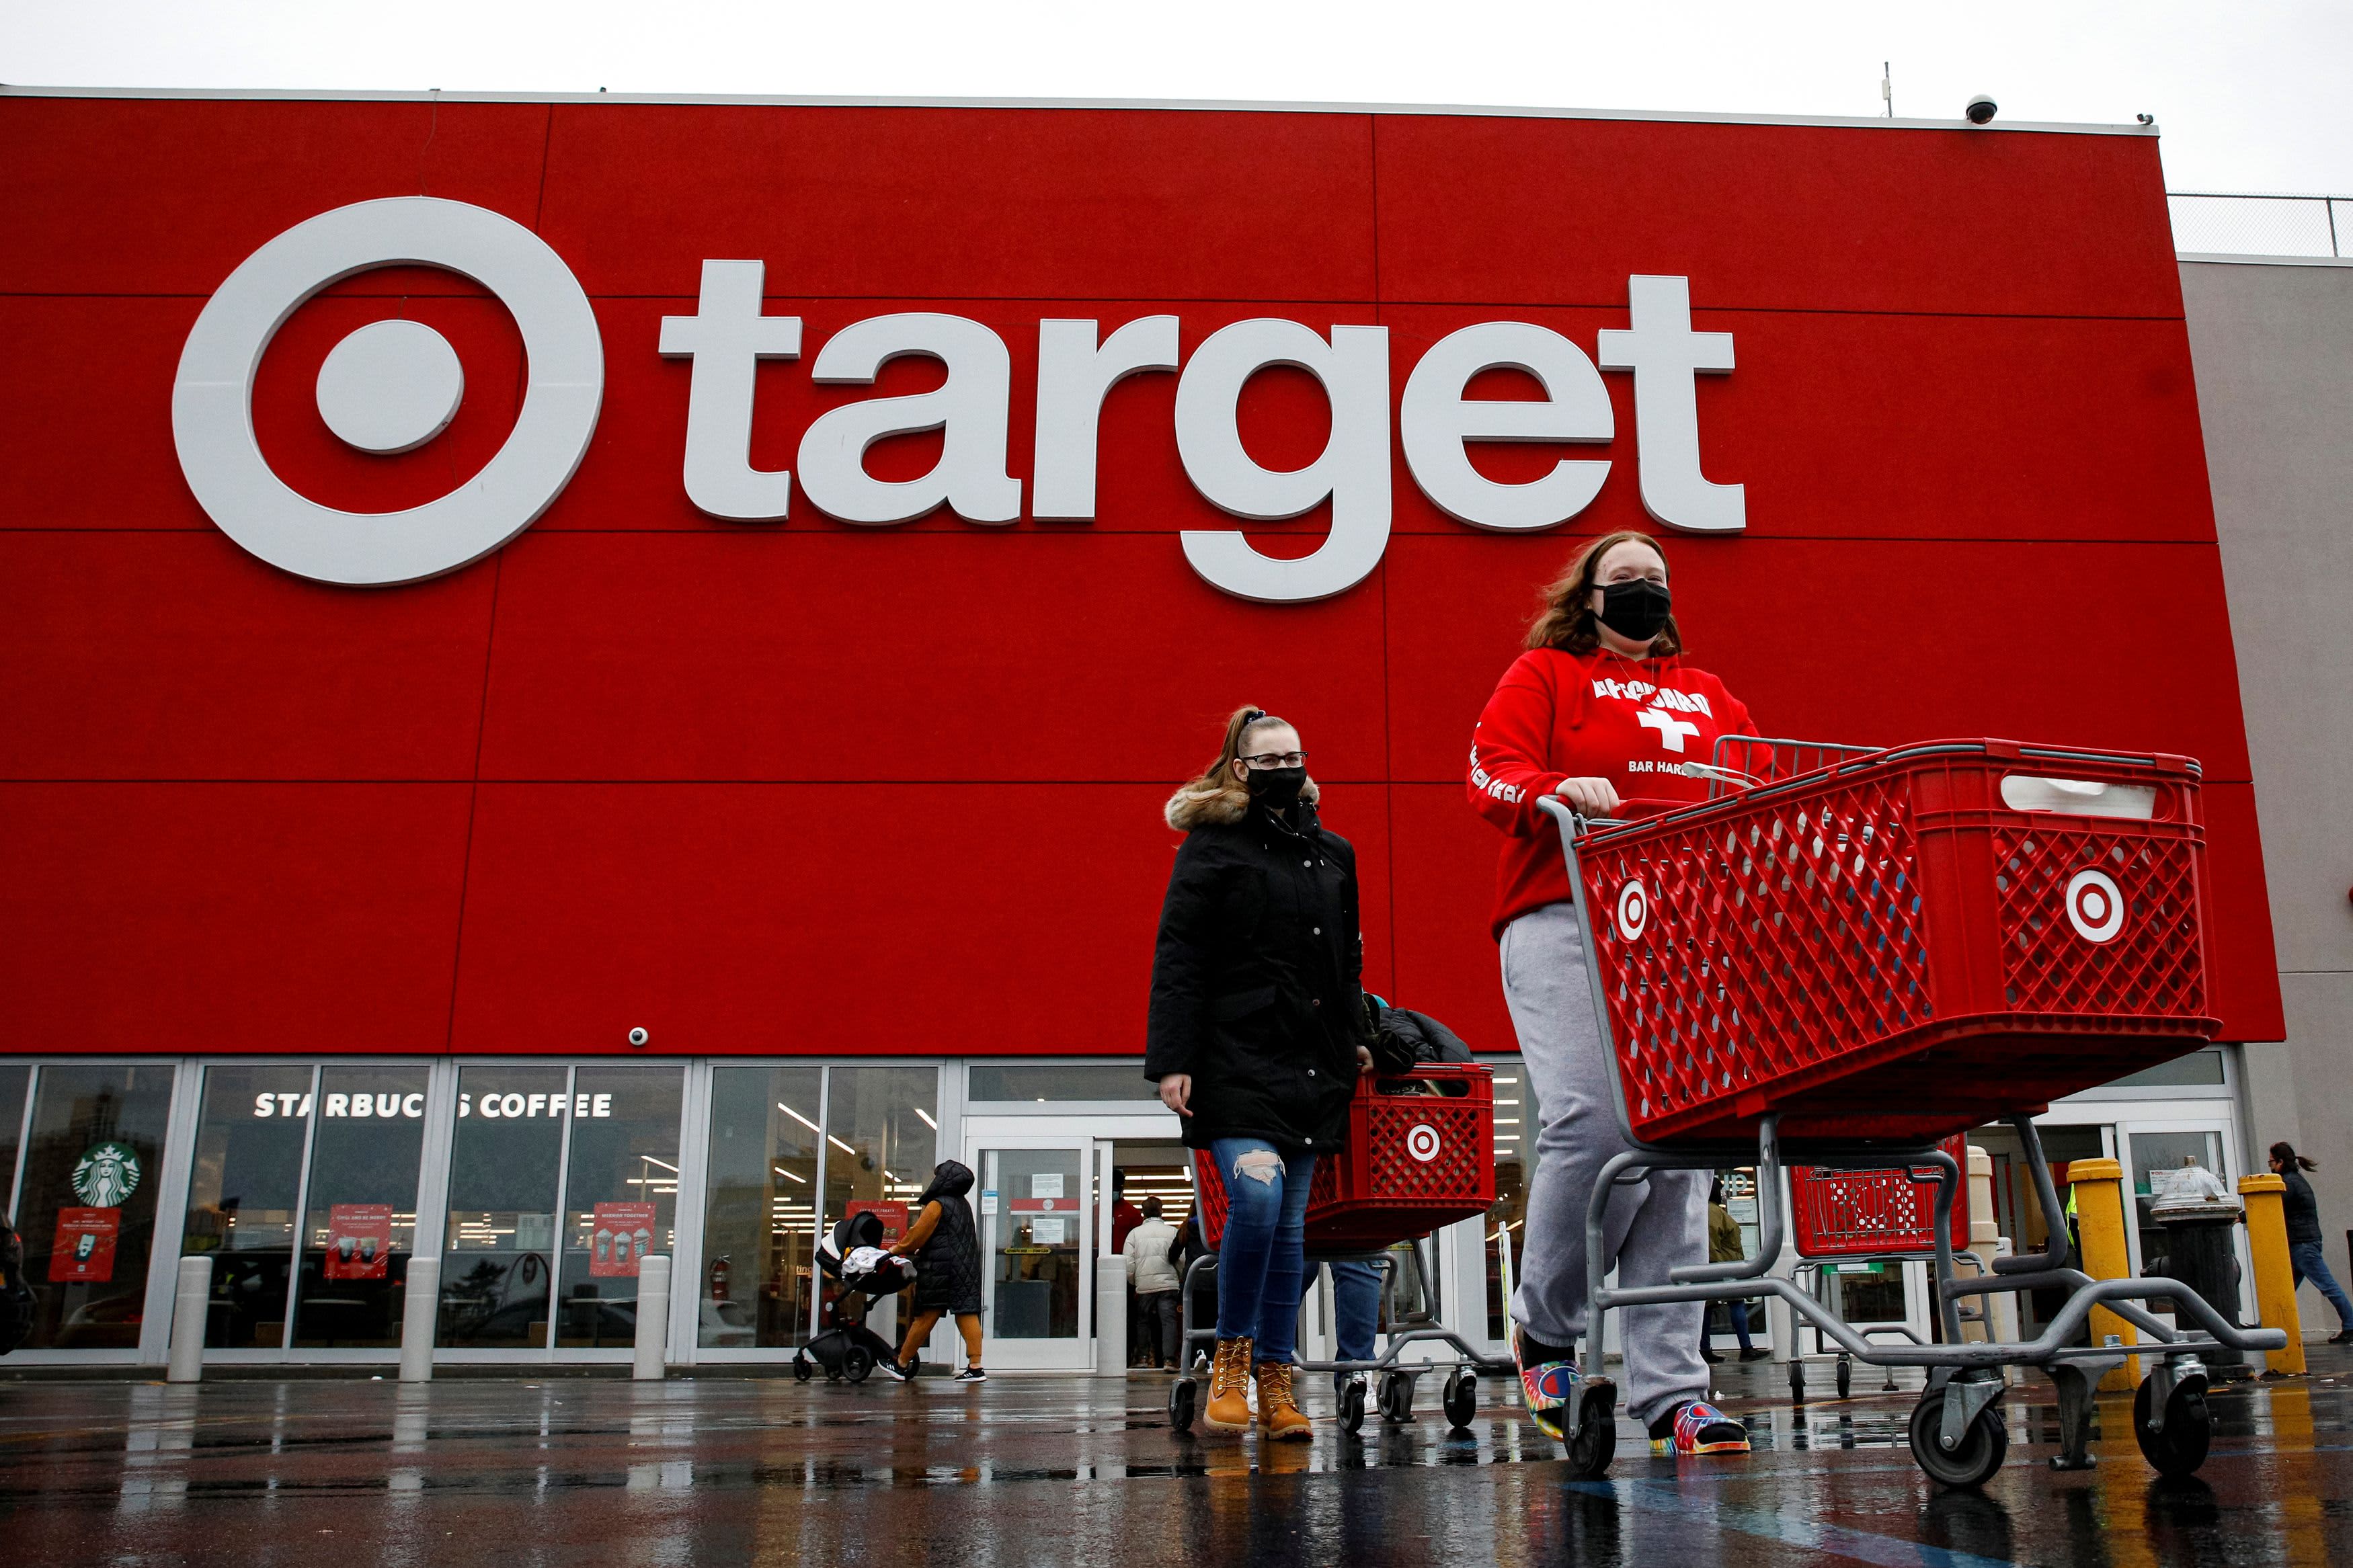 Wells Fargo downgrades Target, says headwinds are building for retailer